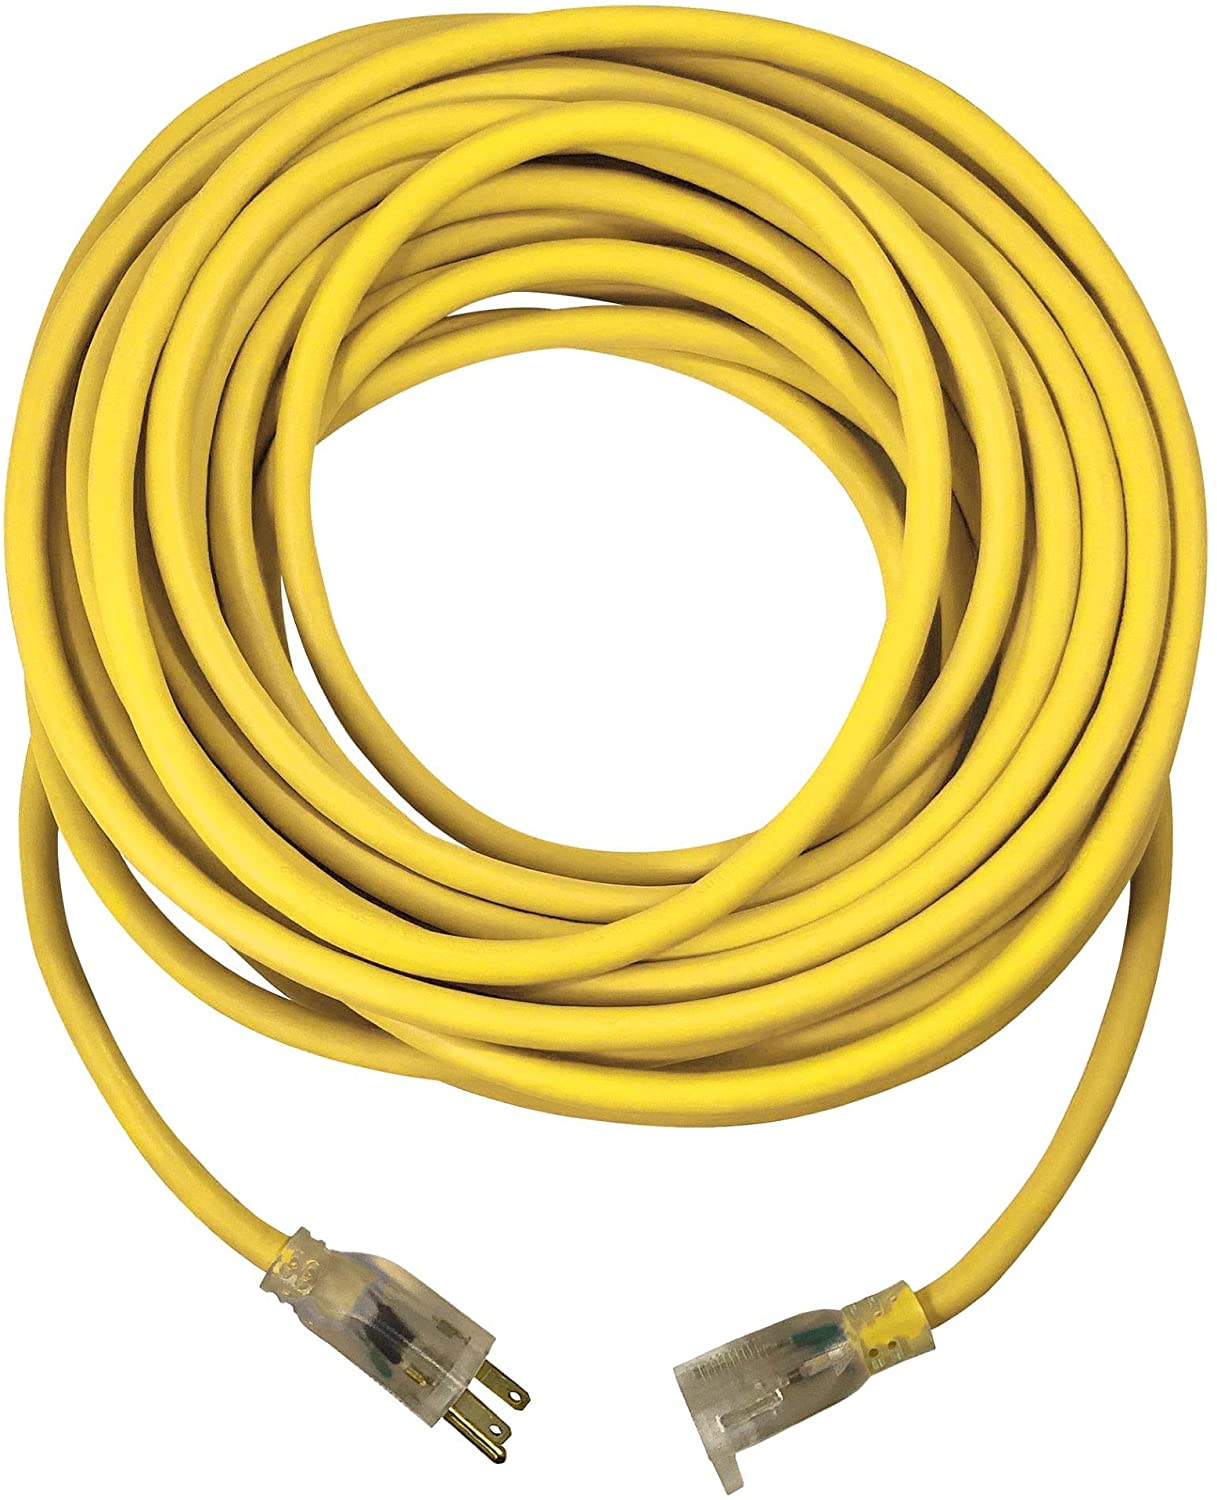 Yellow SJTW 15A Lighted Cord Set 12/3 50' (74050)